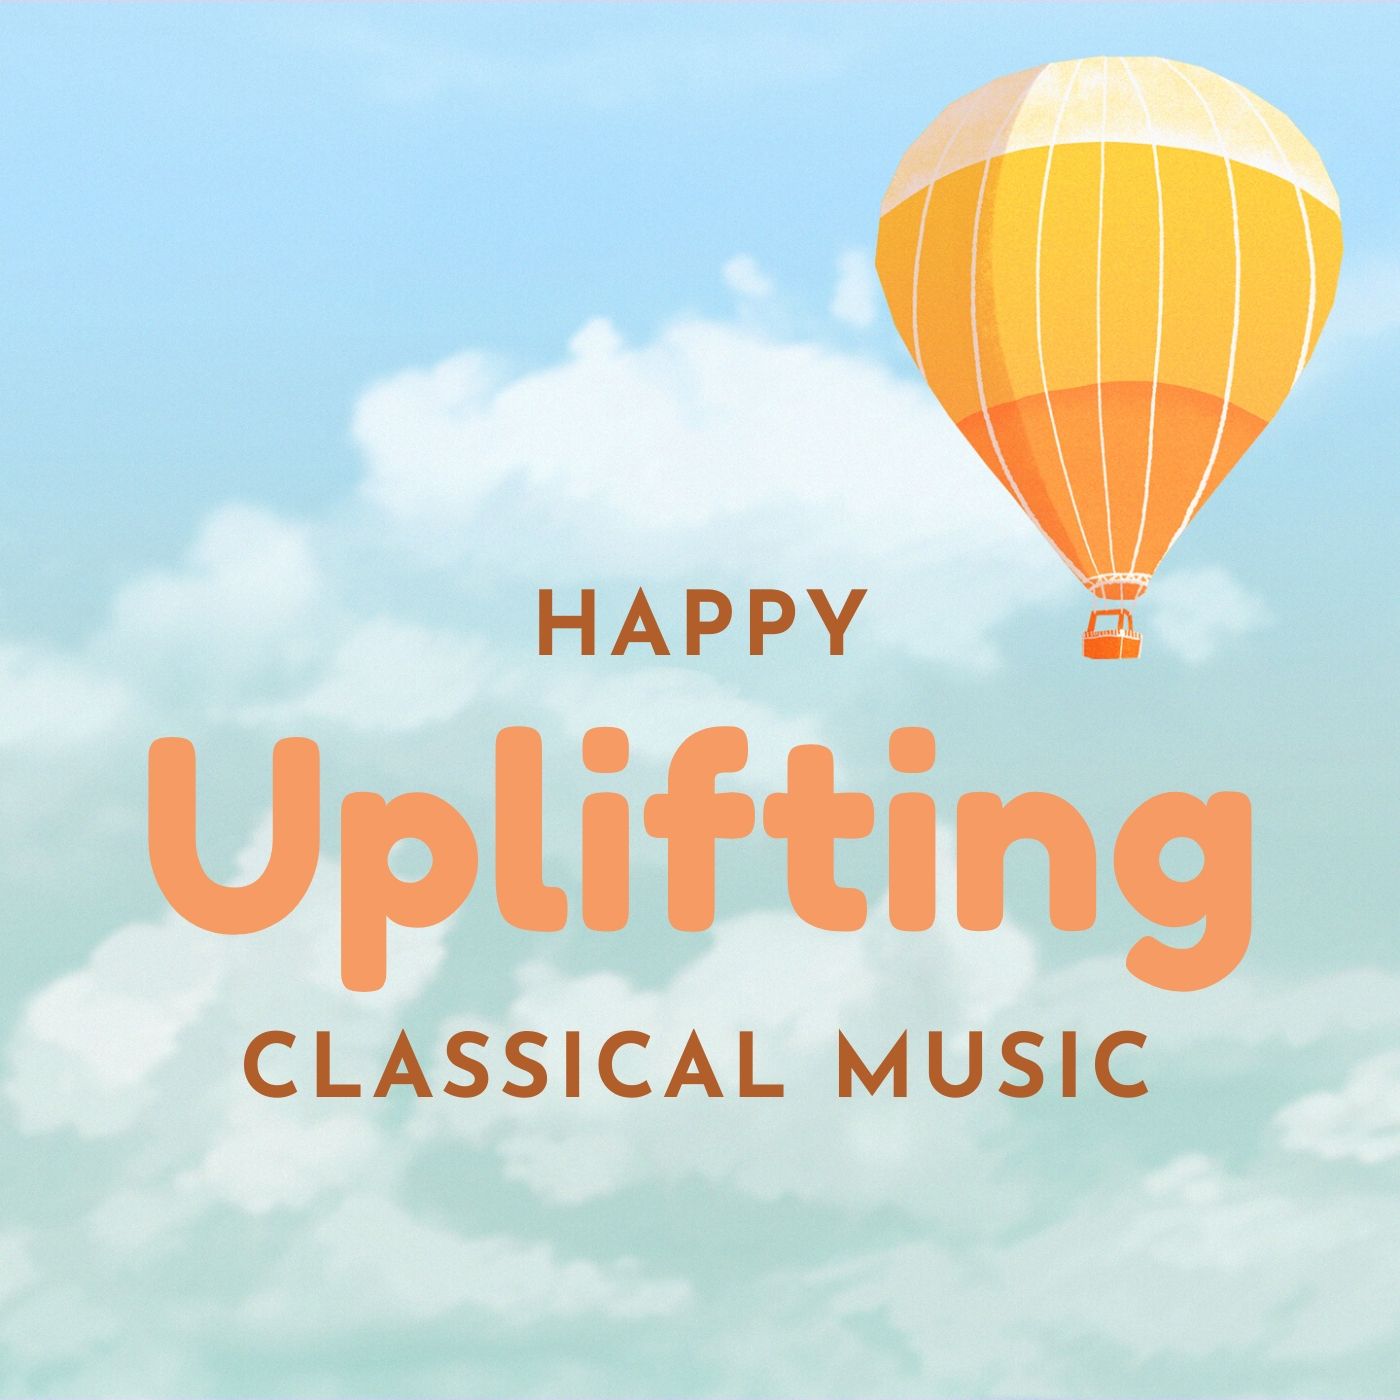 Happy, Uplifting Classical Music